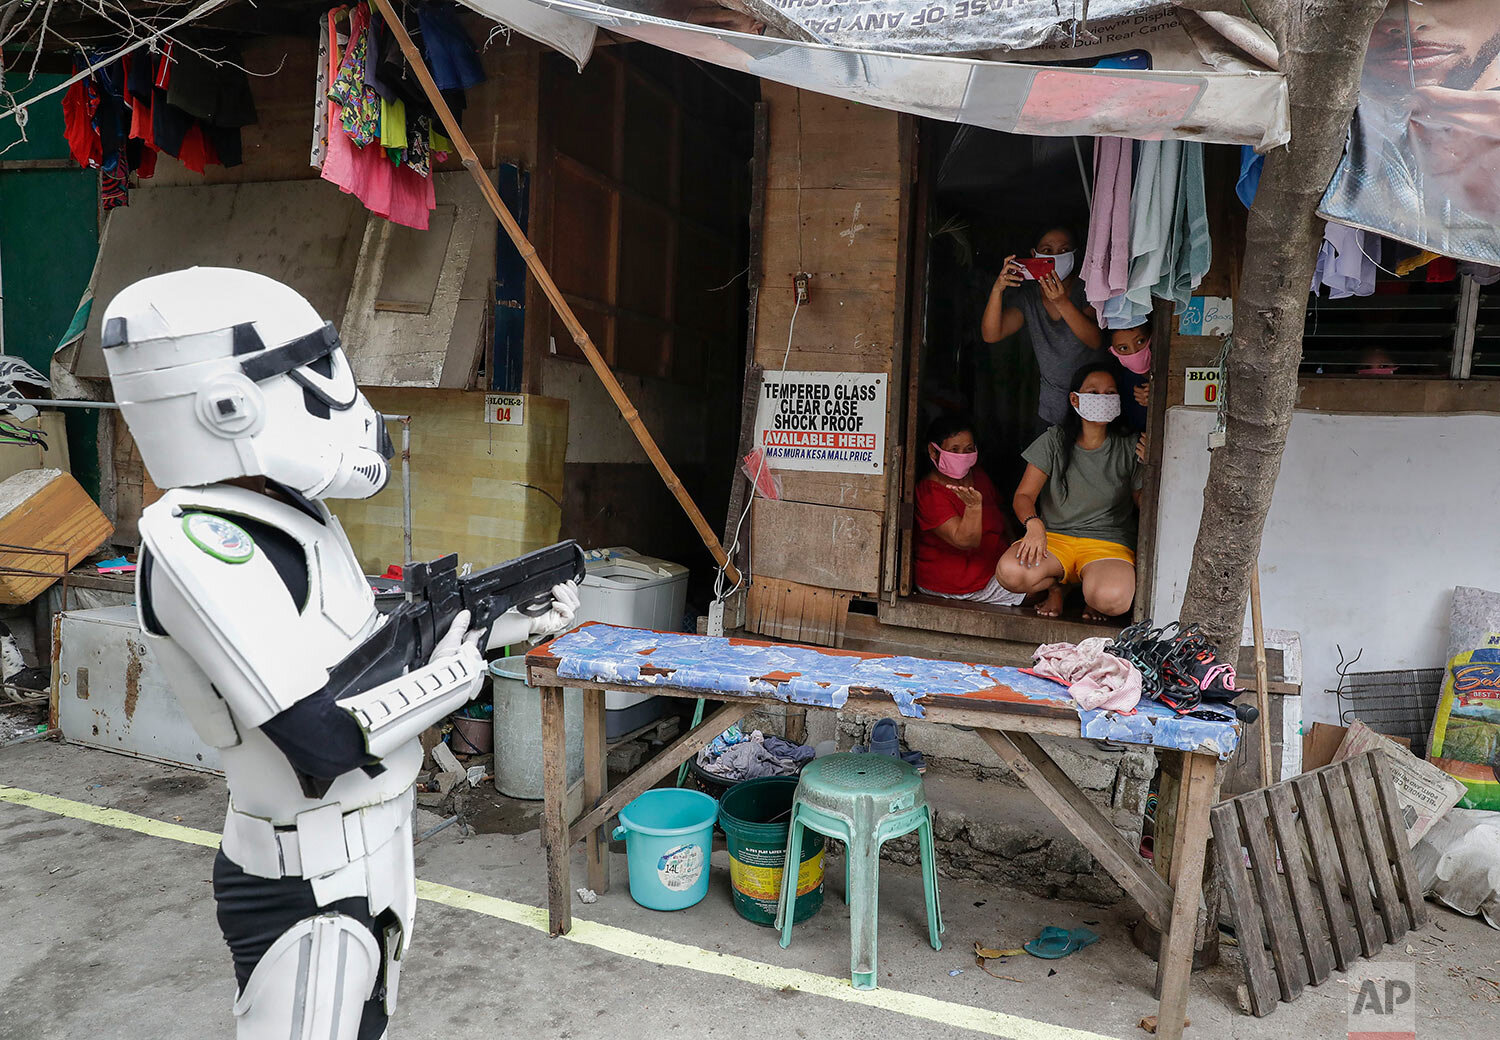  Members of a youth group in Star Wars costumes entertain locals along a road in Malabon, Metro Manila, Philippines, Thursday, April 30, 2020. (AP Photo/Aaron Favila) 